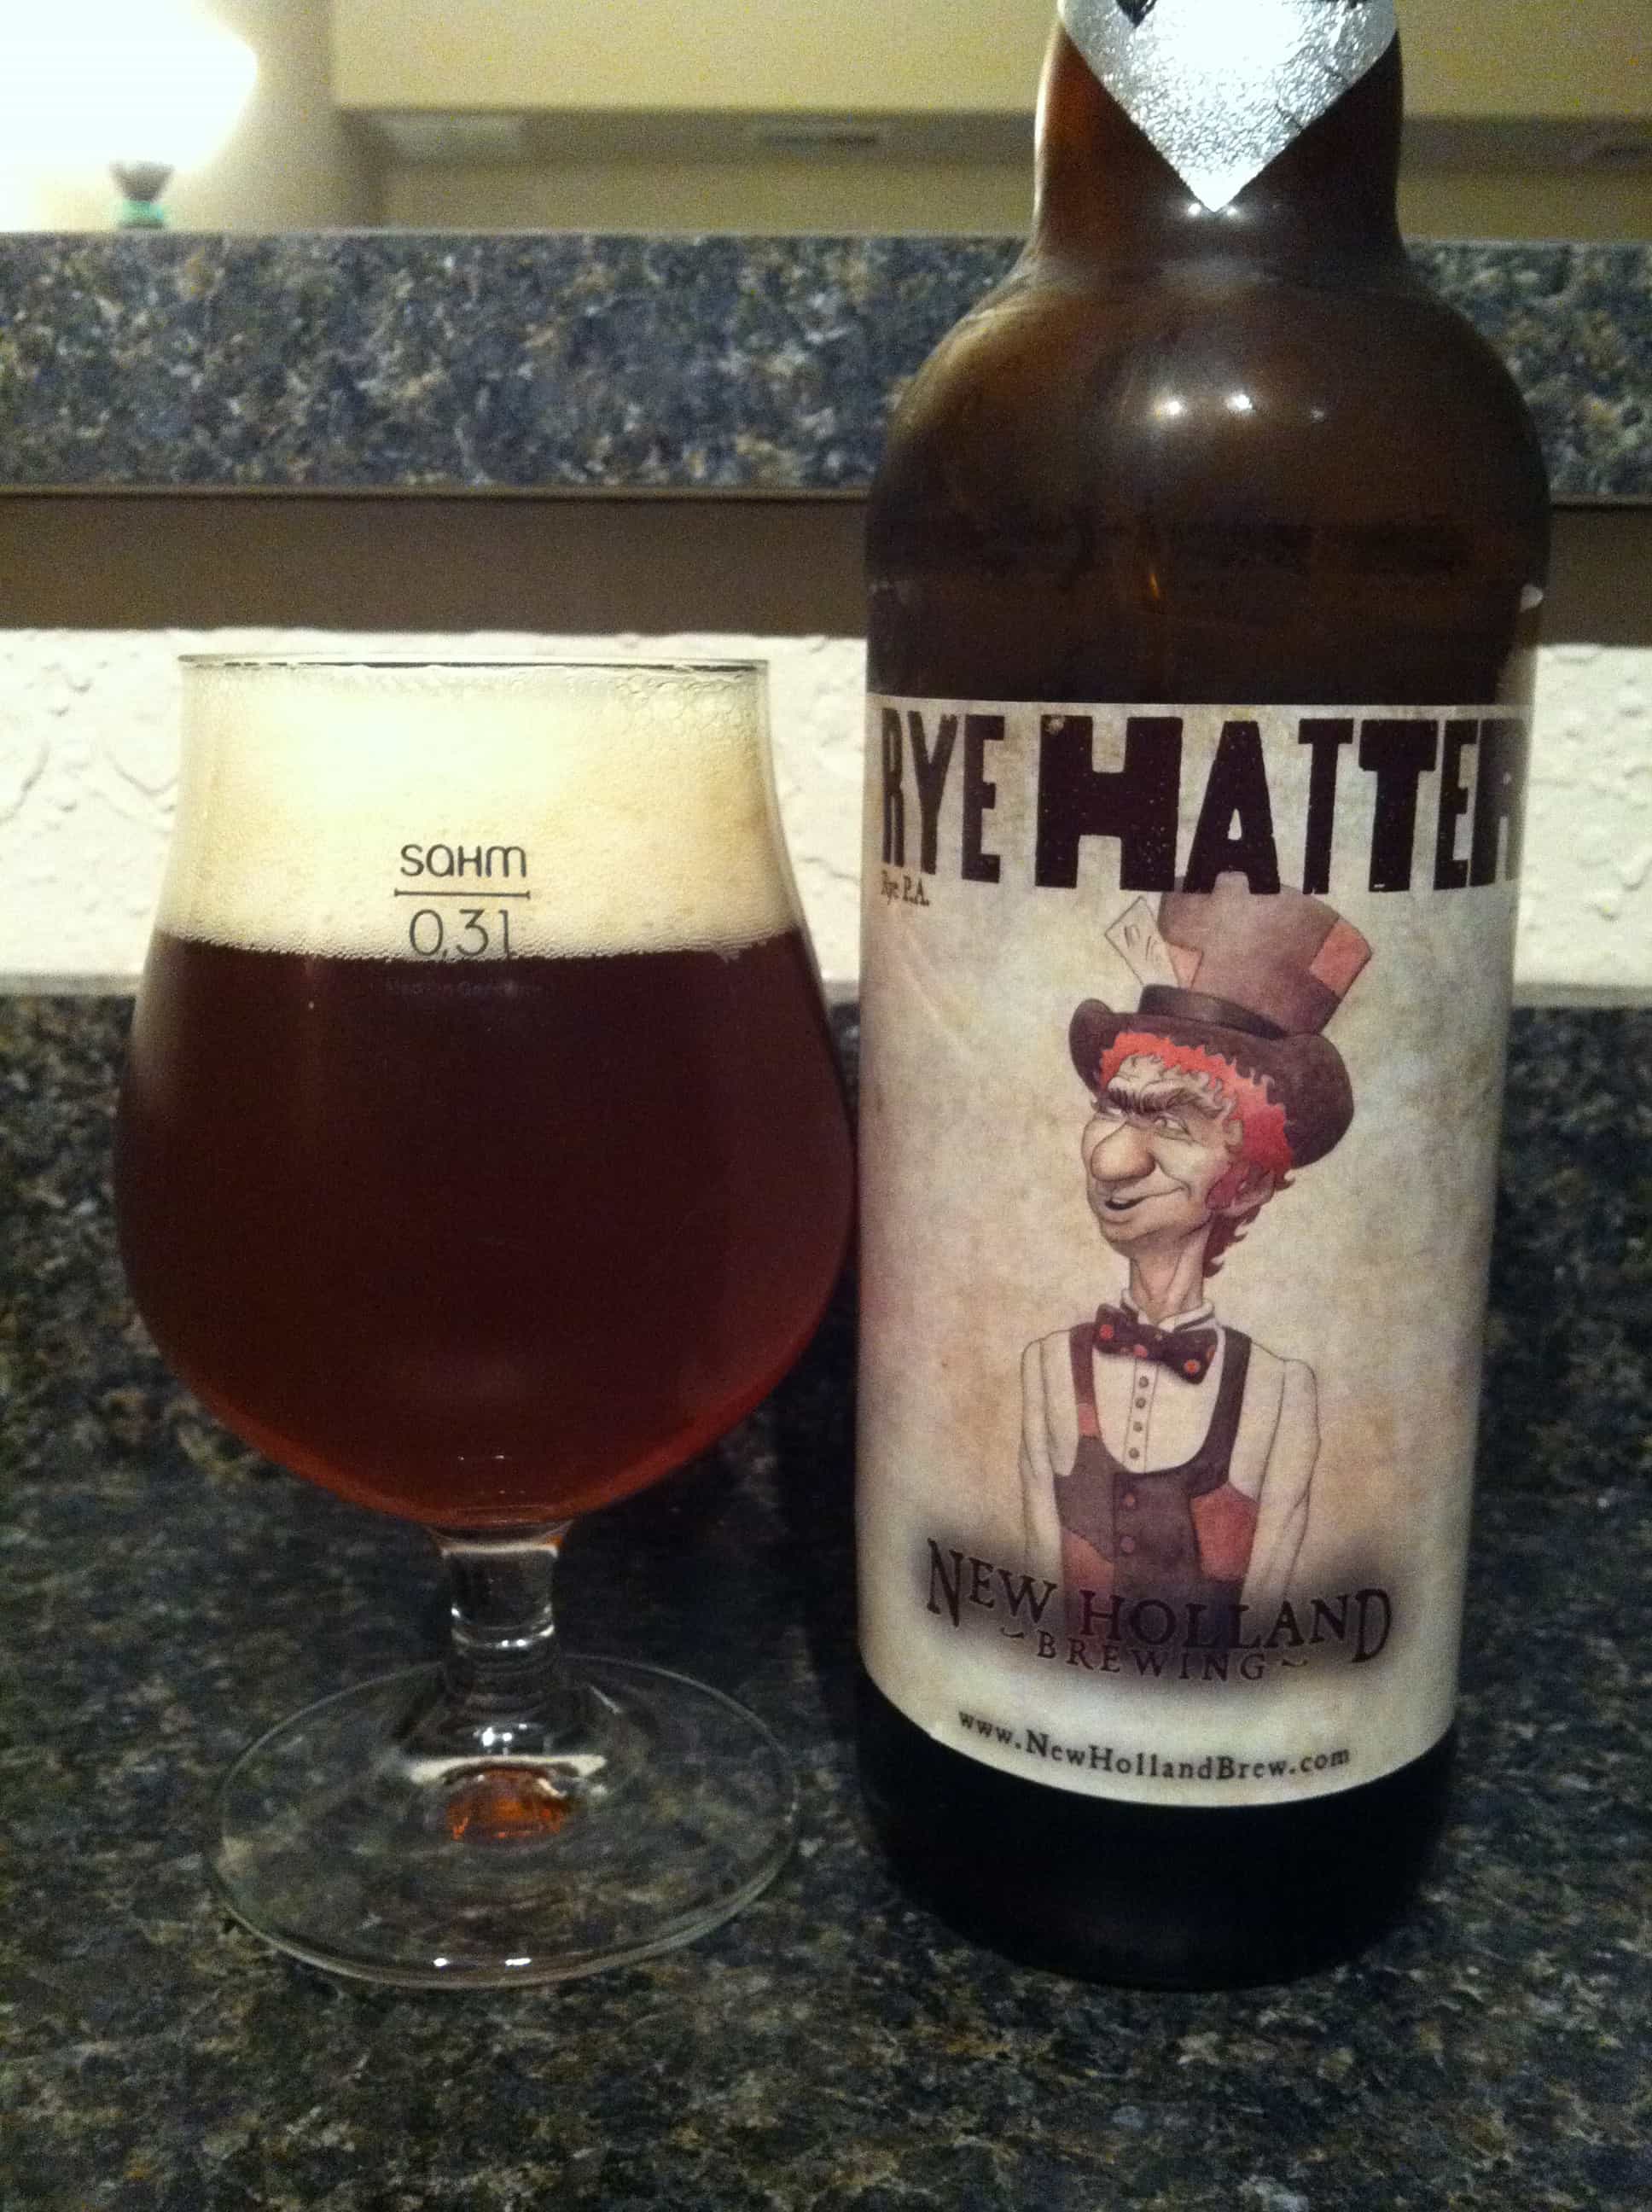 New Holland Rye Hatter India Pale Ale